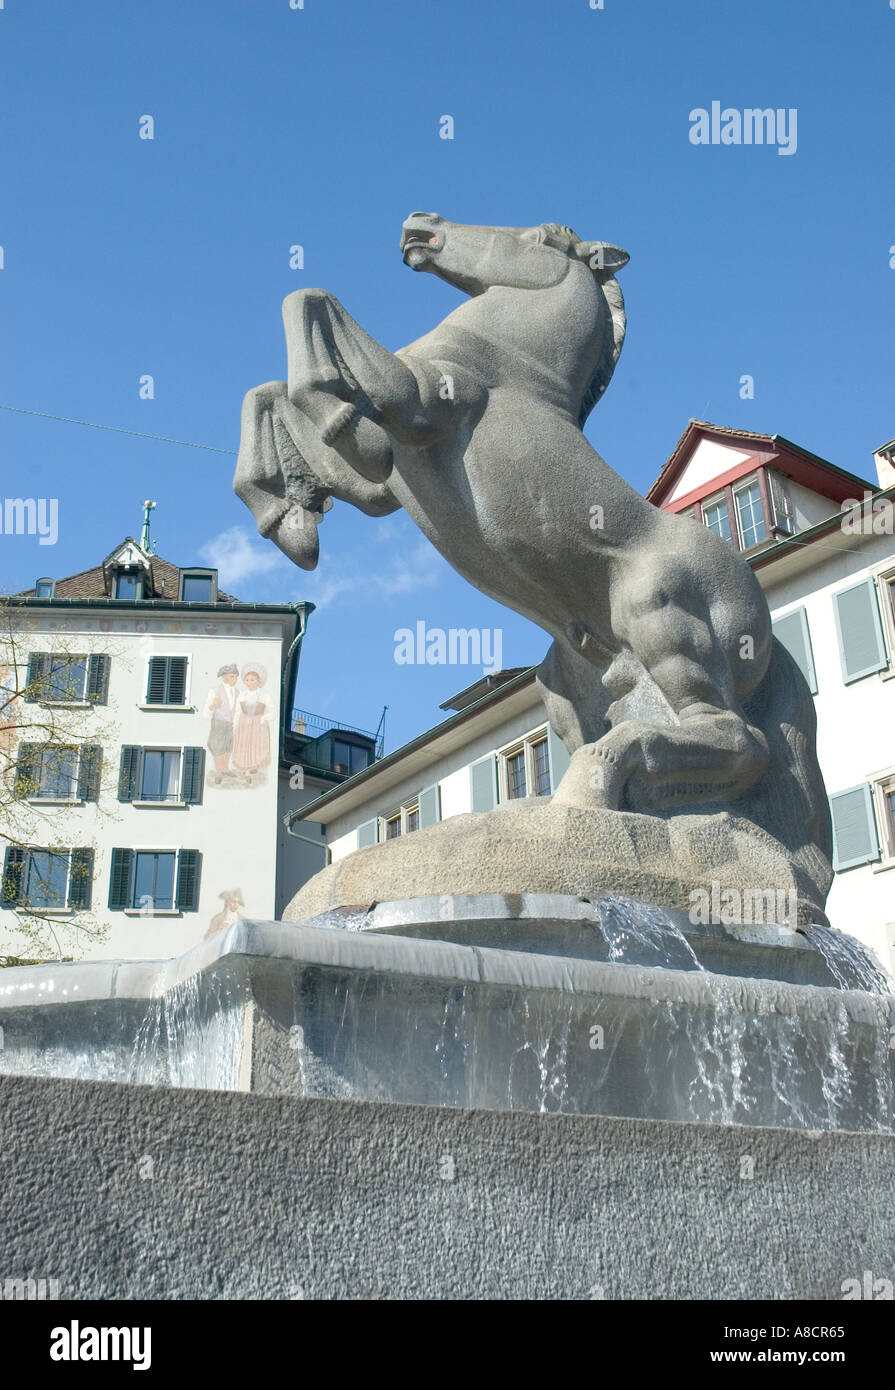 A scene from the beautiful city of Zurich in Switzerland Stock Photo